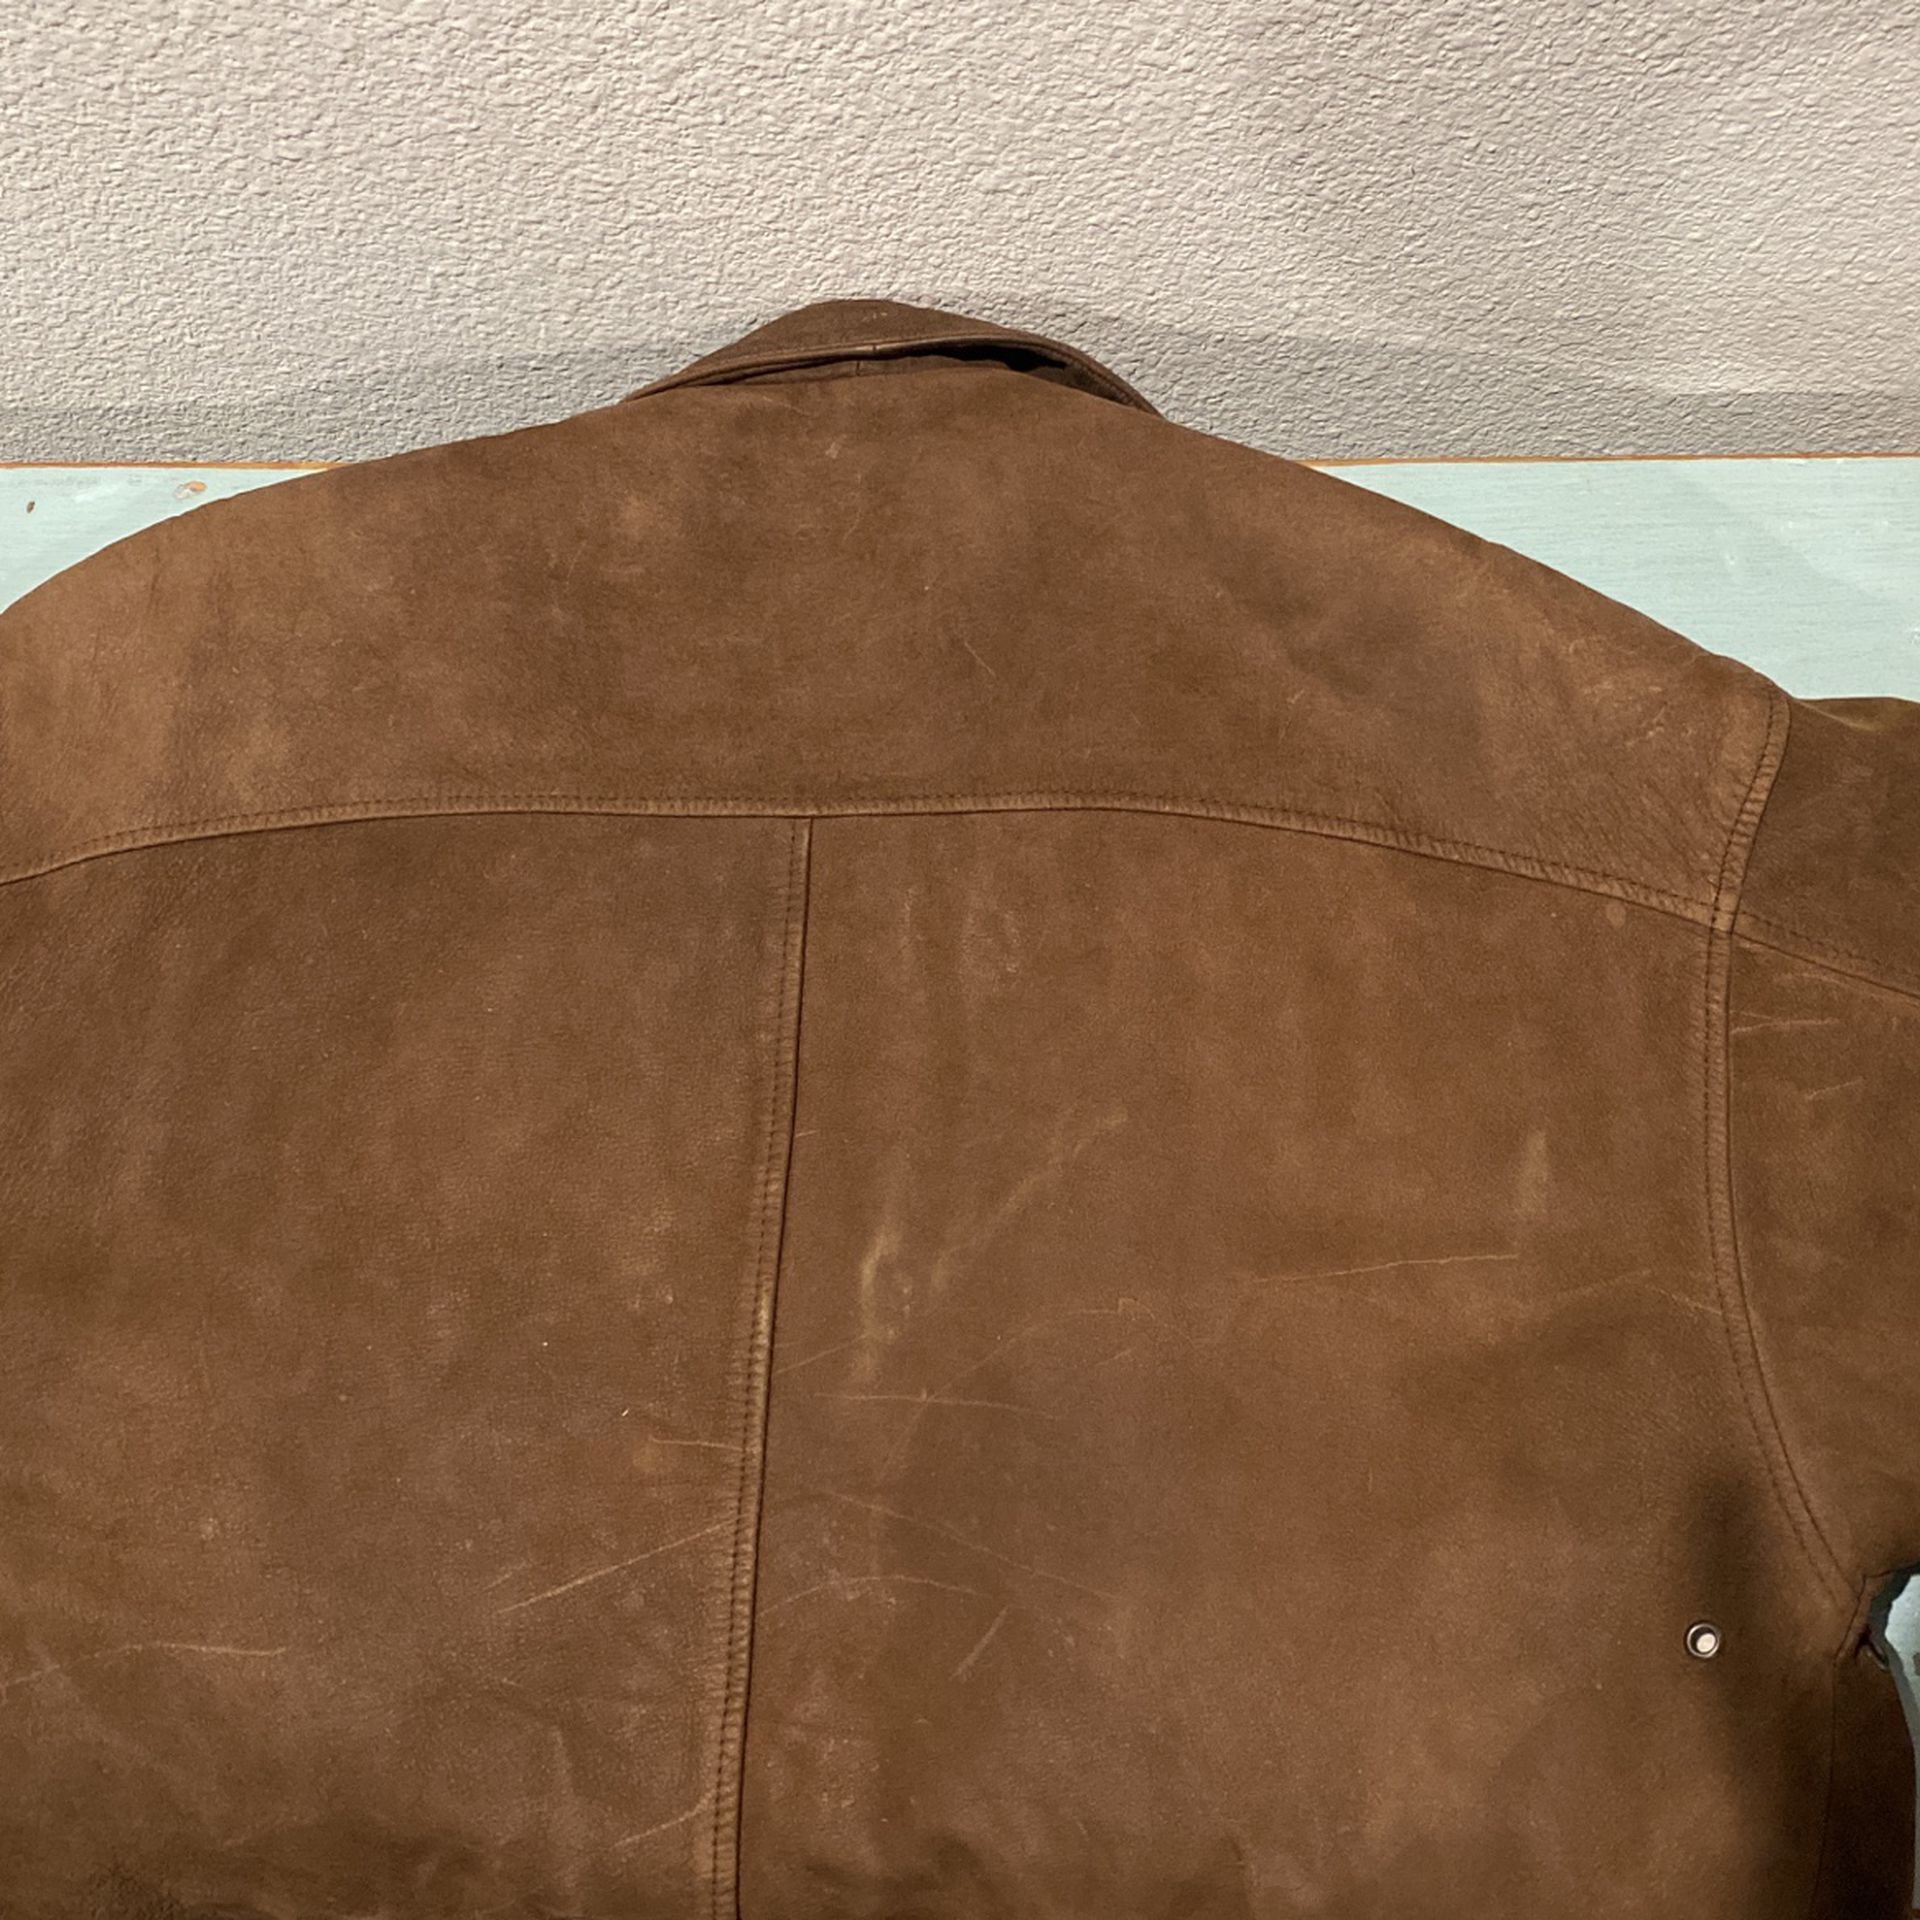 Leather Bomber Jacket Adventure Bound With Thinsulate Thermal Liner by Wilson’s Leather. 